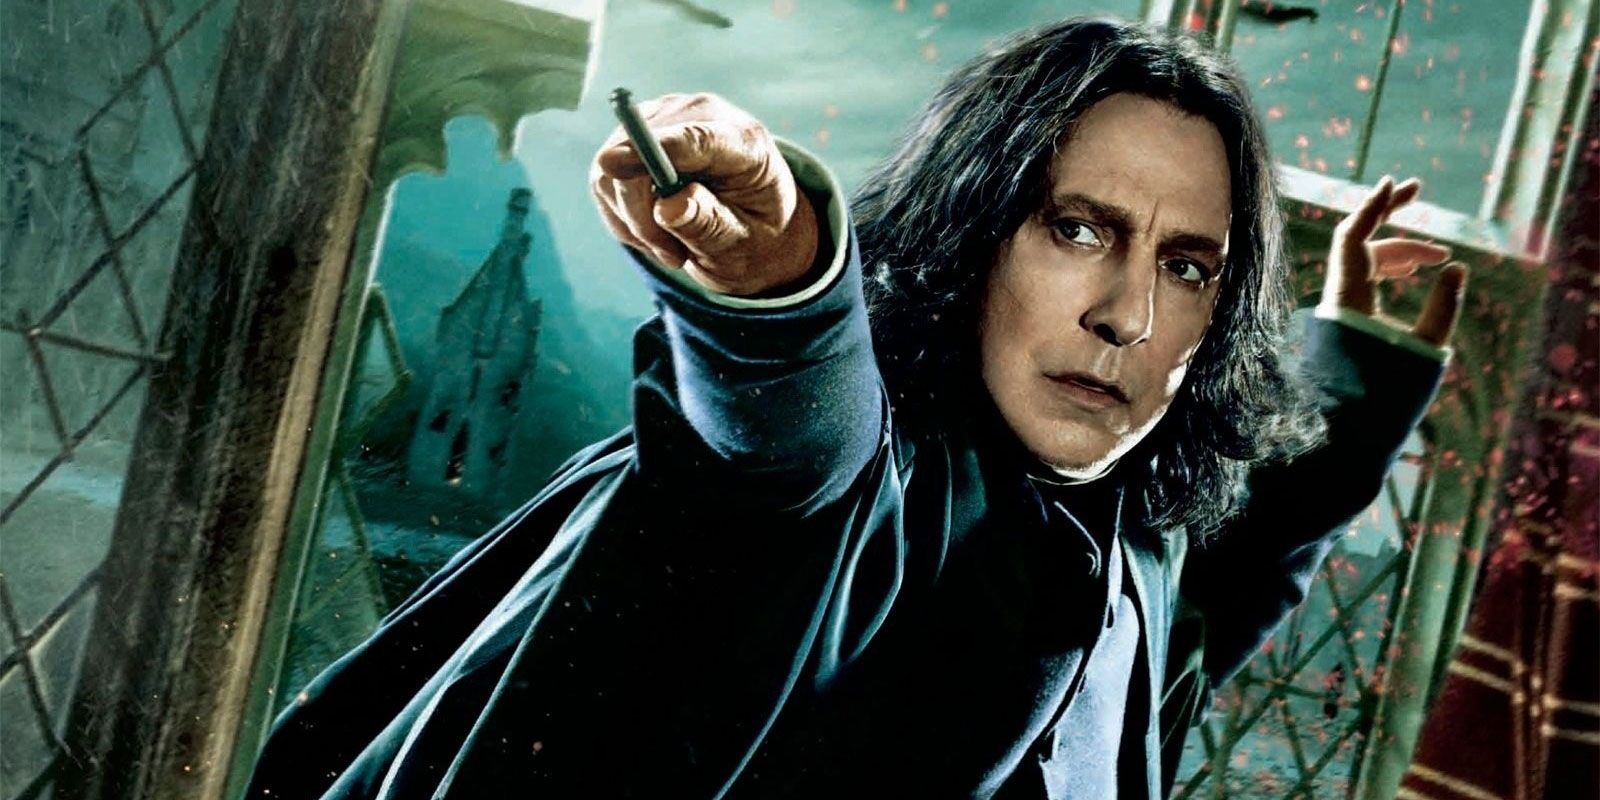 Snape (Alan Rickman) holds up his wand in a poster for Harry Potter and the Deathly Hallows Part 2